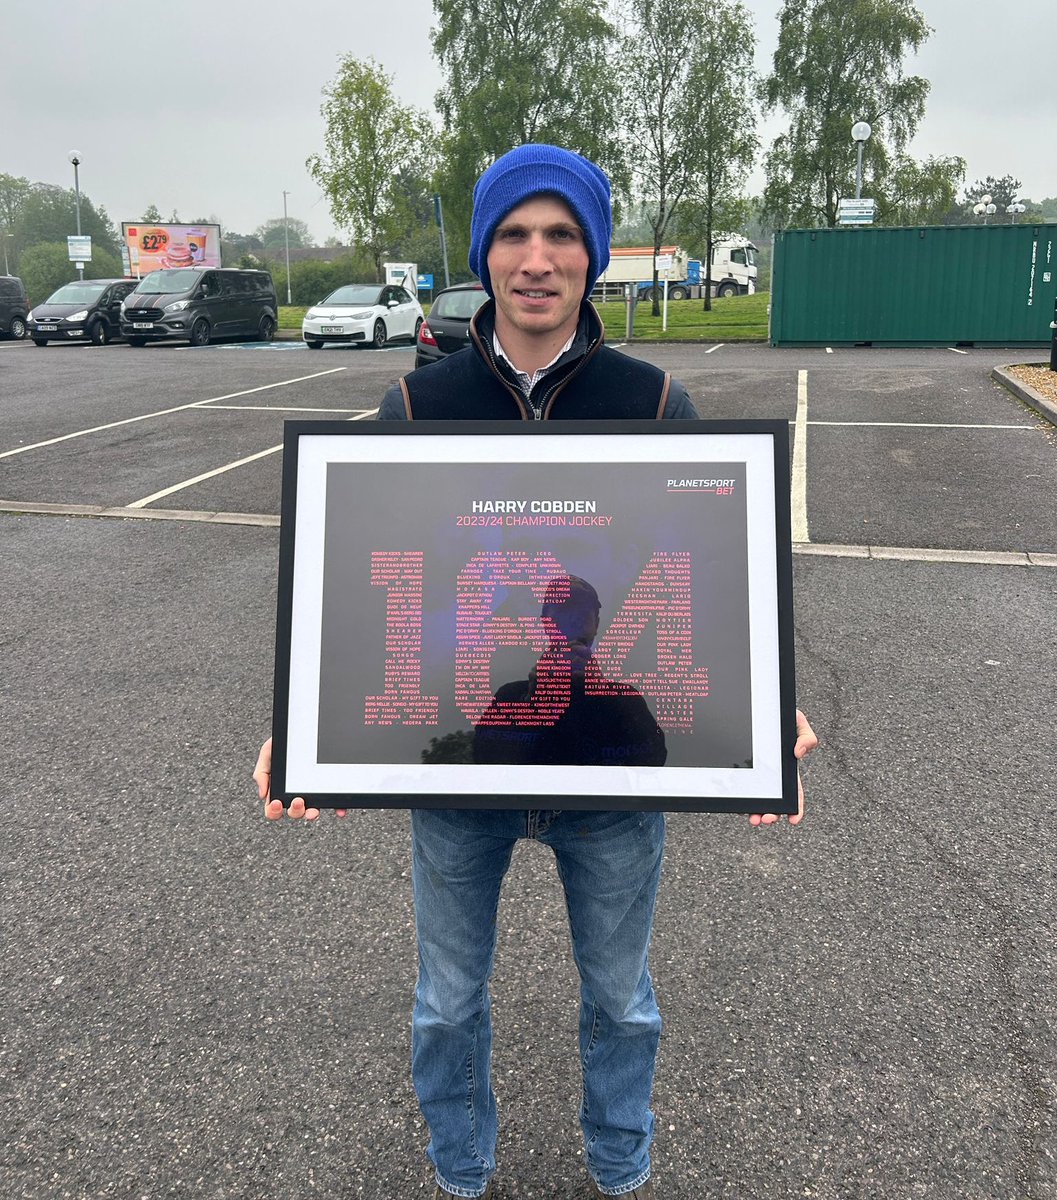 Thanks Planet Sport Bet for having this made to celebrate my Champion Jockey title win. They have another copy to give away to one of you!
 
Share this post and follow @PlanetSportBet for a chance to win!